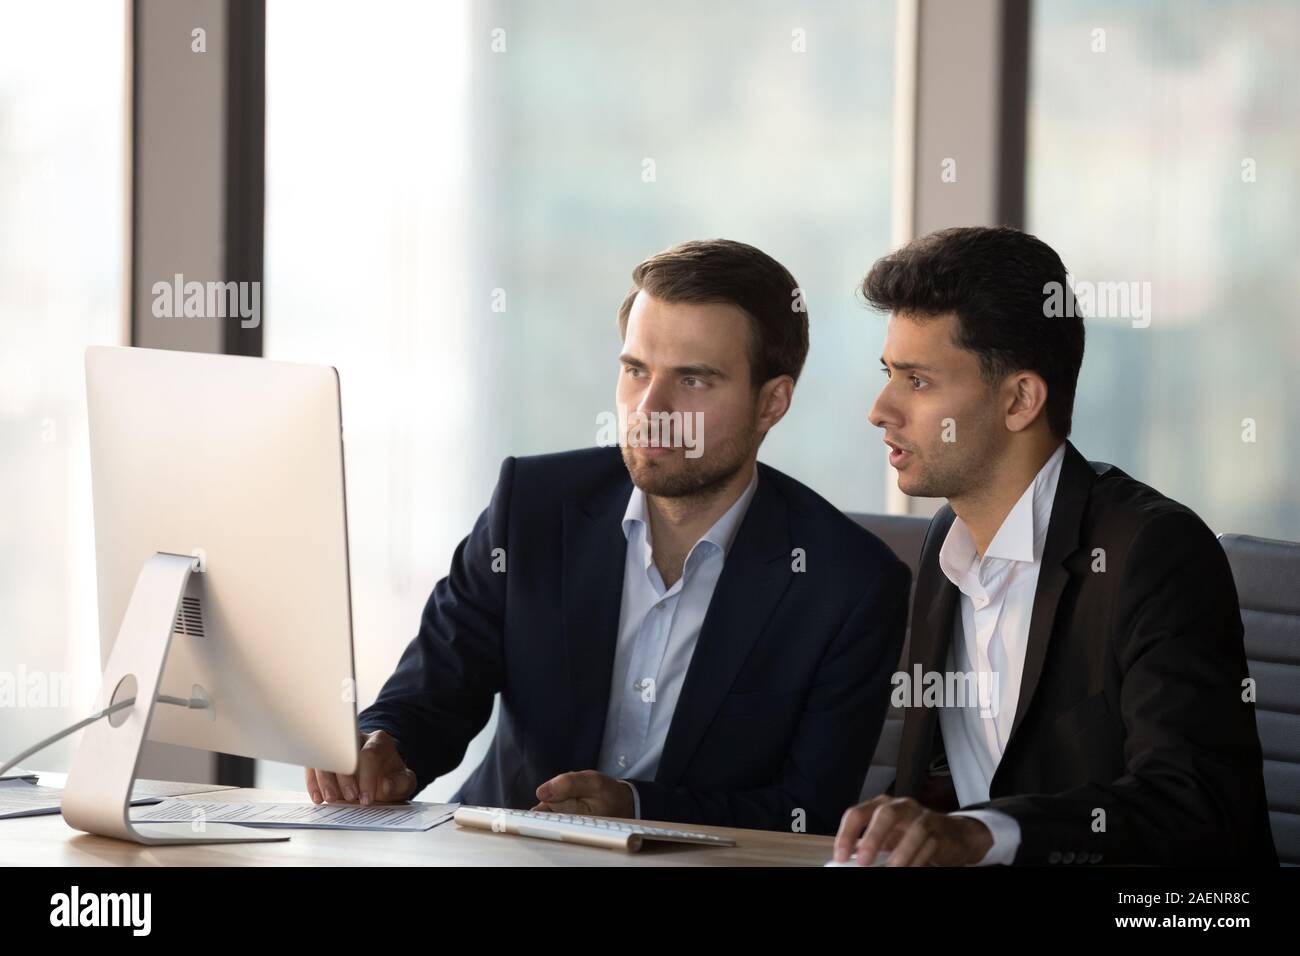 Arabian businessman mentor helping intern with corporate software Stock Photo